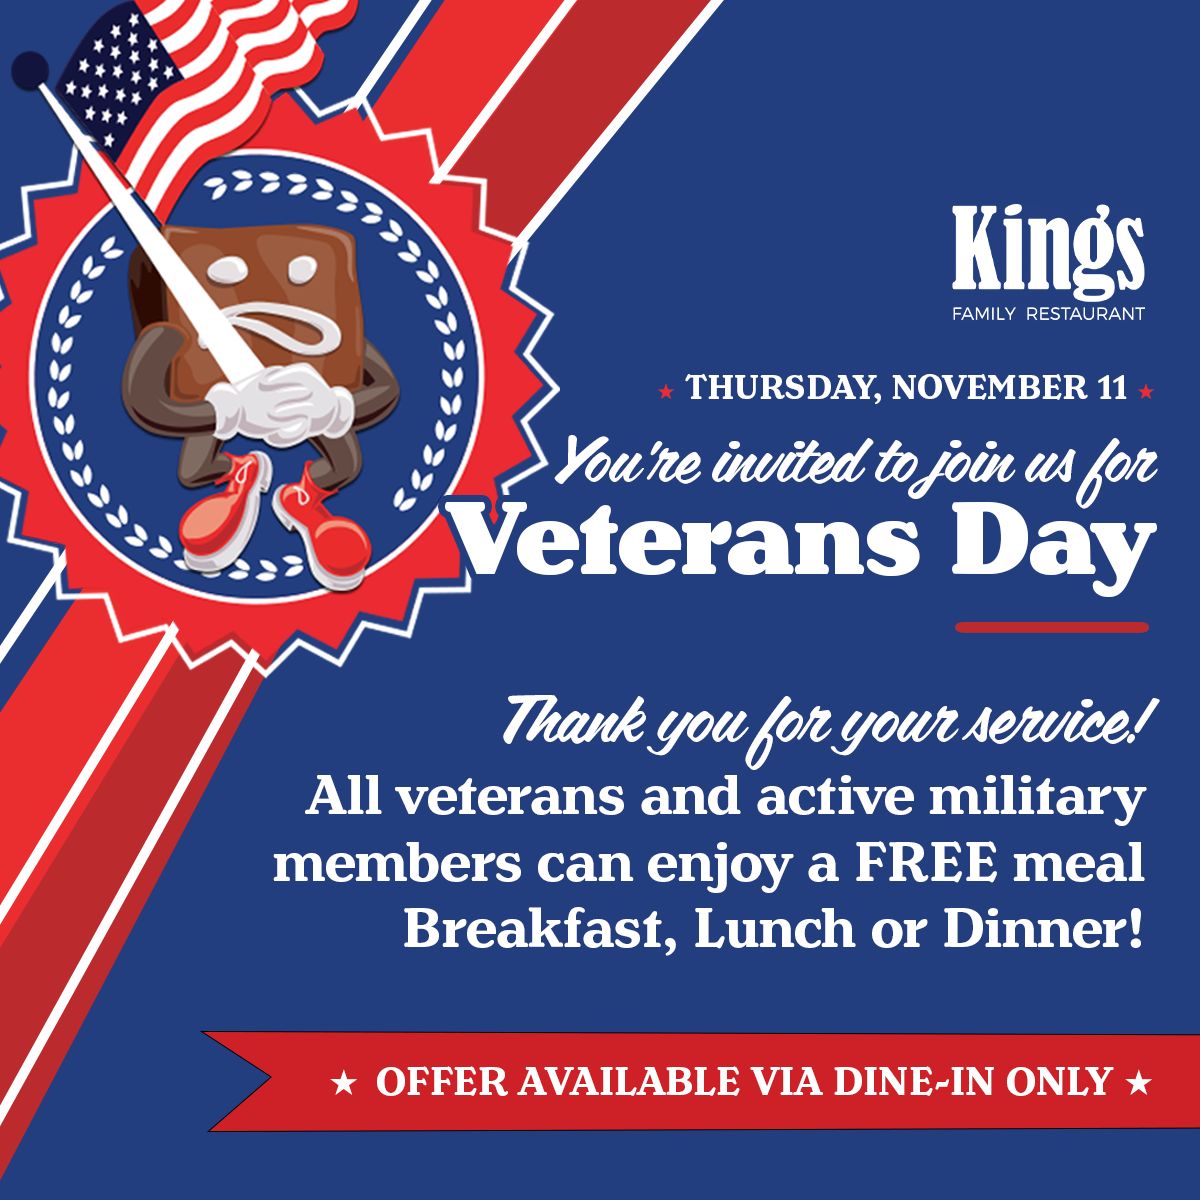 Kings Family Restaurant Will Be Celebrating Veterans Day, Thursday November 11th With a Free Meal for Veterans and Active Military Members